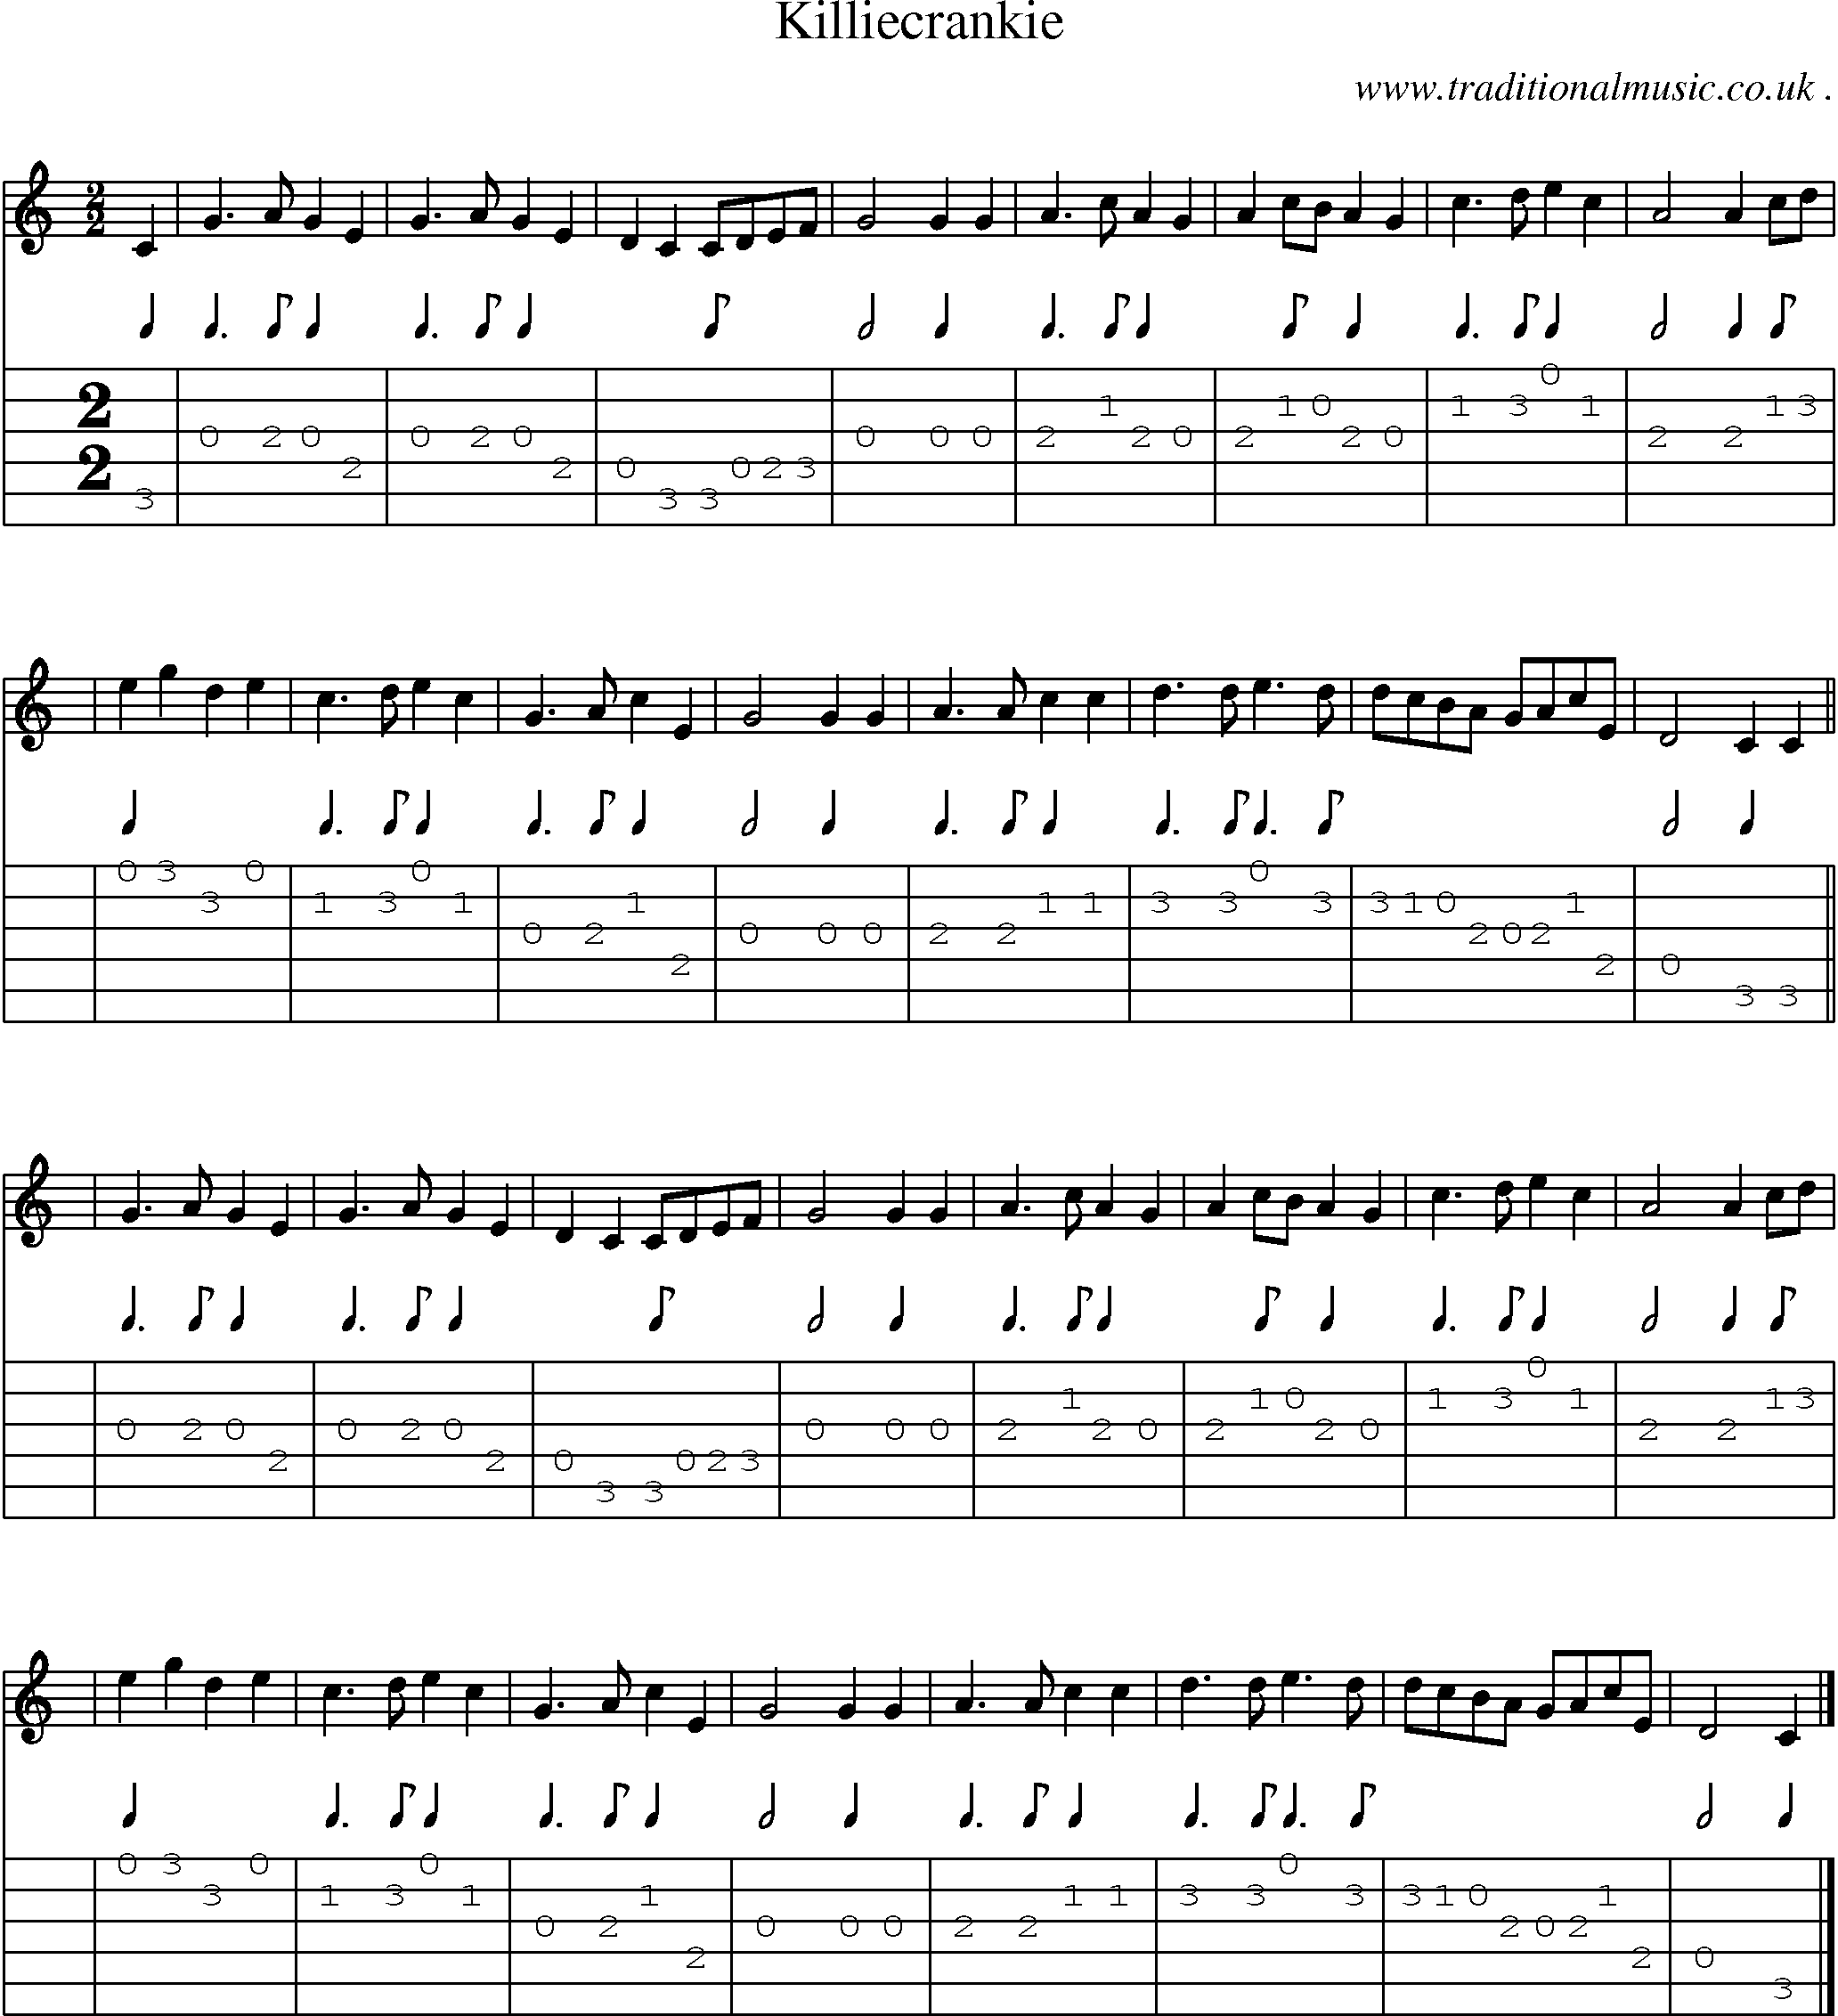 Sheet-music  score, Chords and Guitar Tabs for Killiecrankie